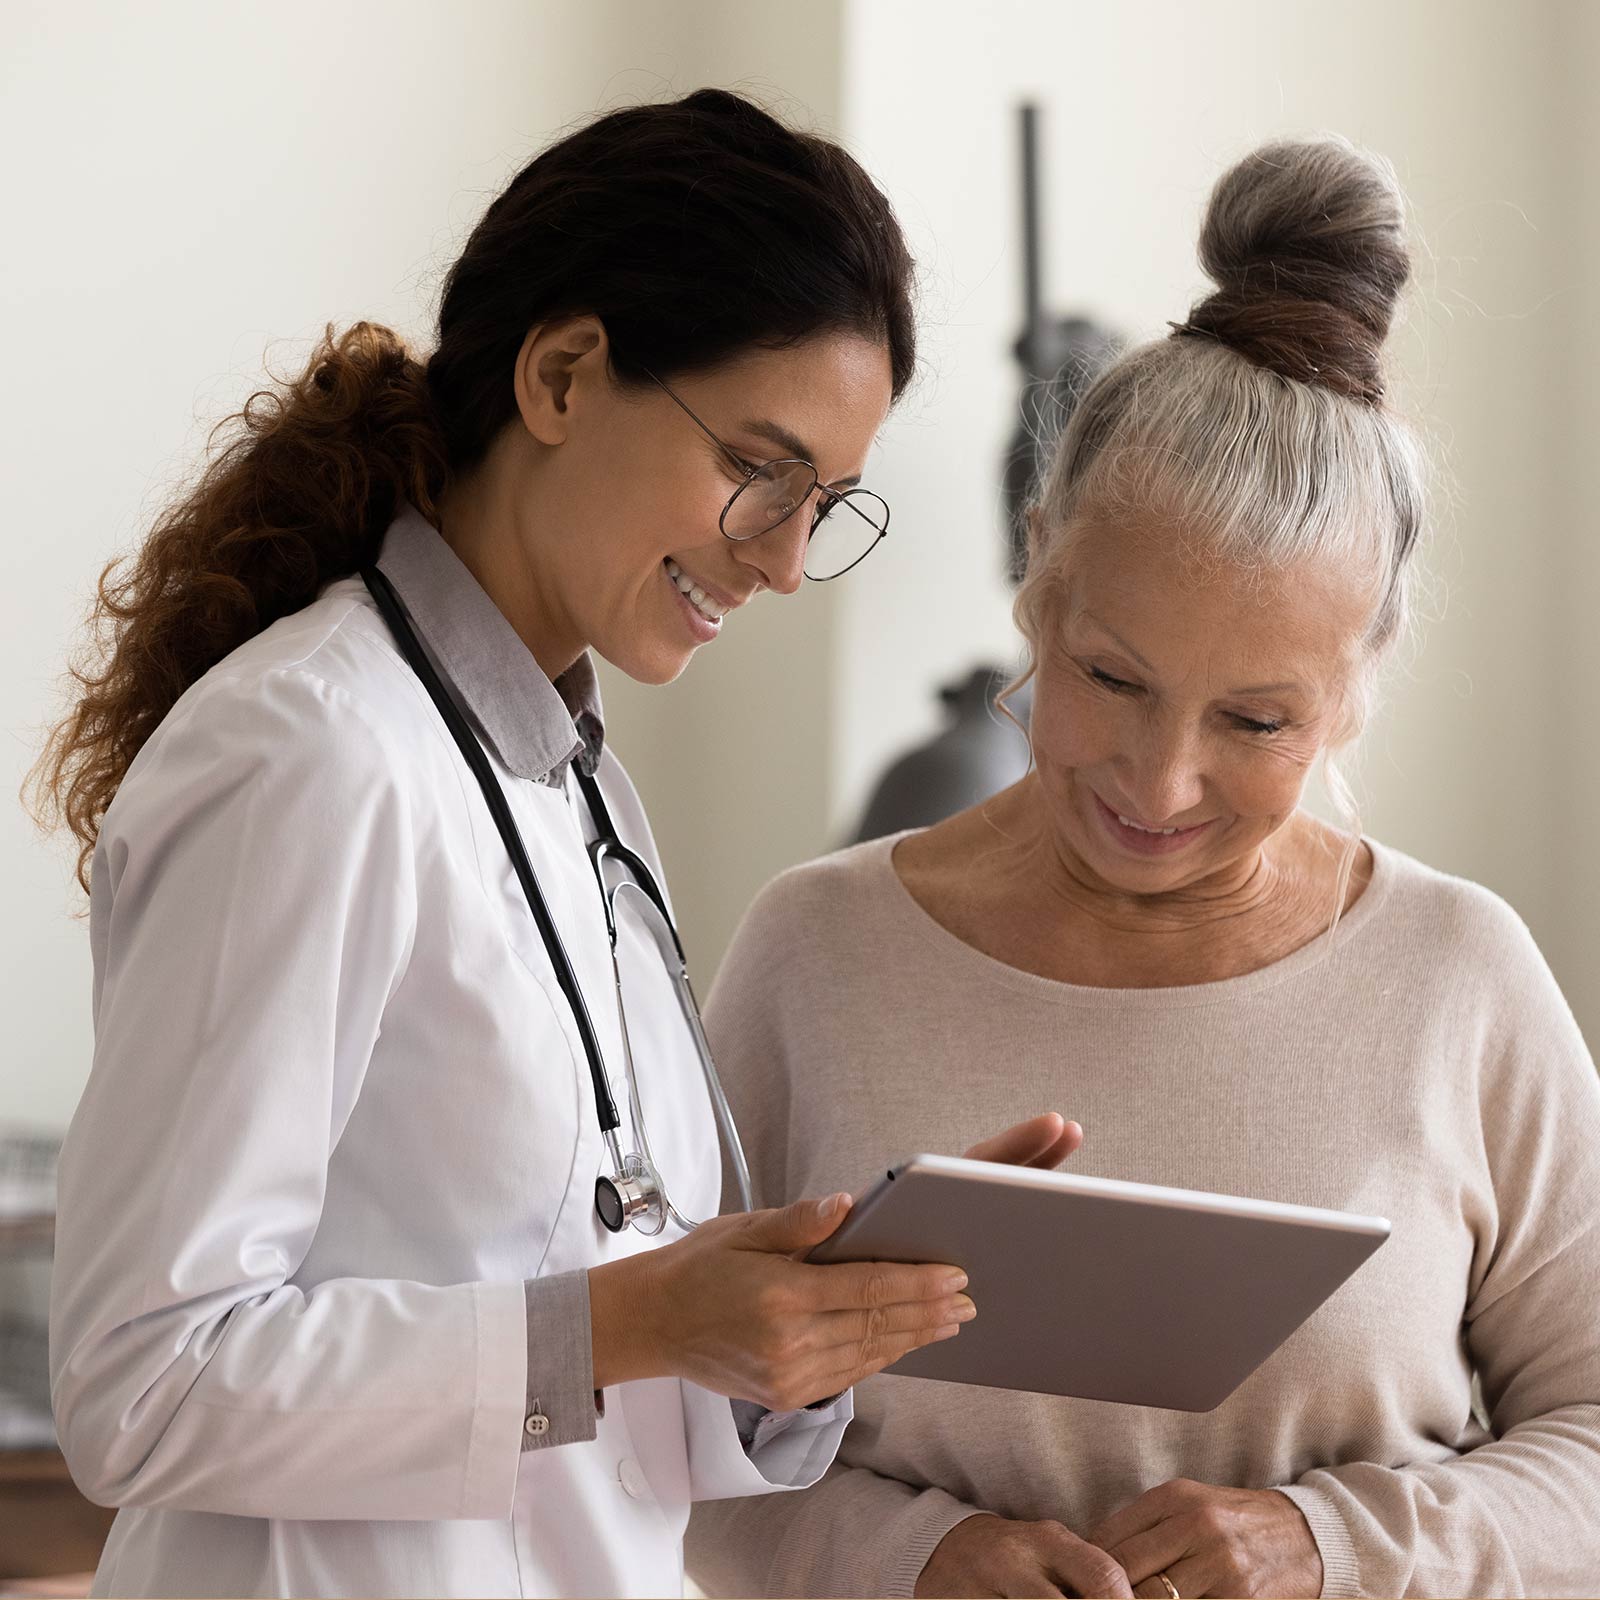 A healthcare provider showing a patient something on the tablet.